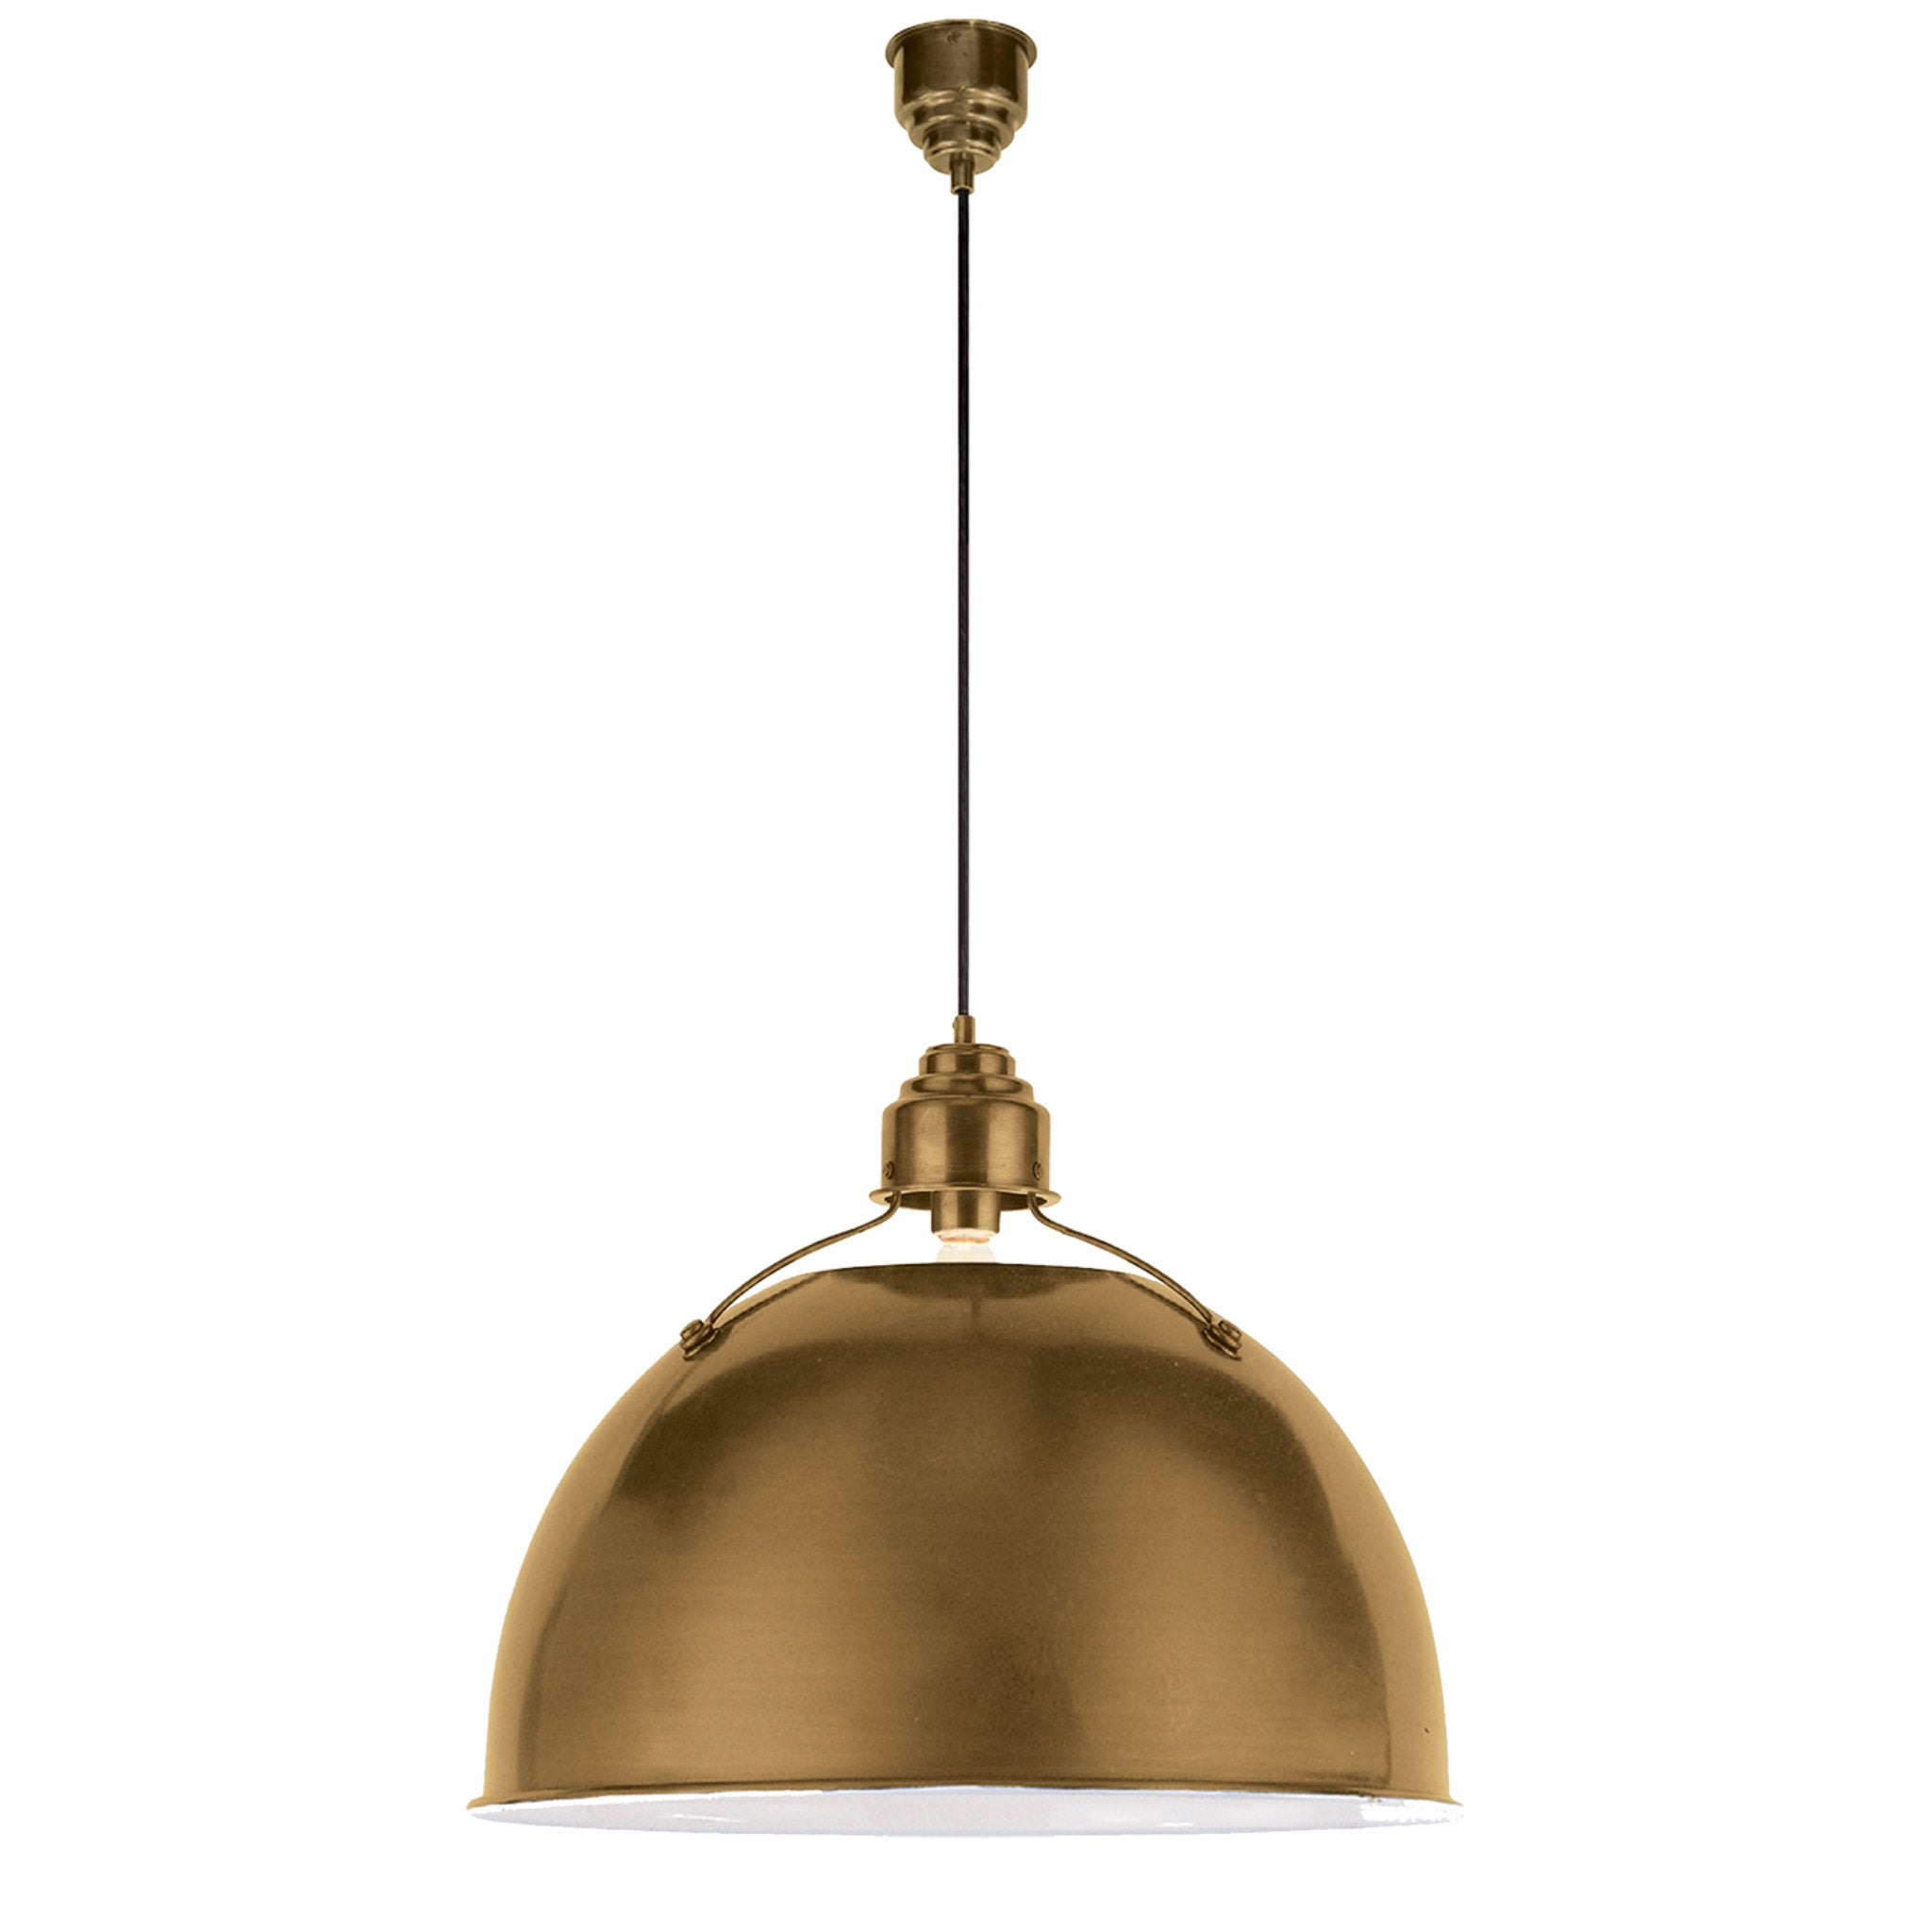 Visual Comfort - TOB 2621HAB - Two Light Picture Light - Cosmopolitan -  Hand-Rubbed Antique Brass — Lighting Design Store